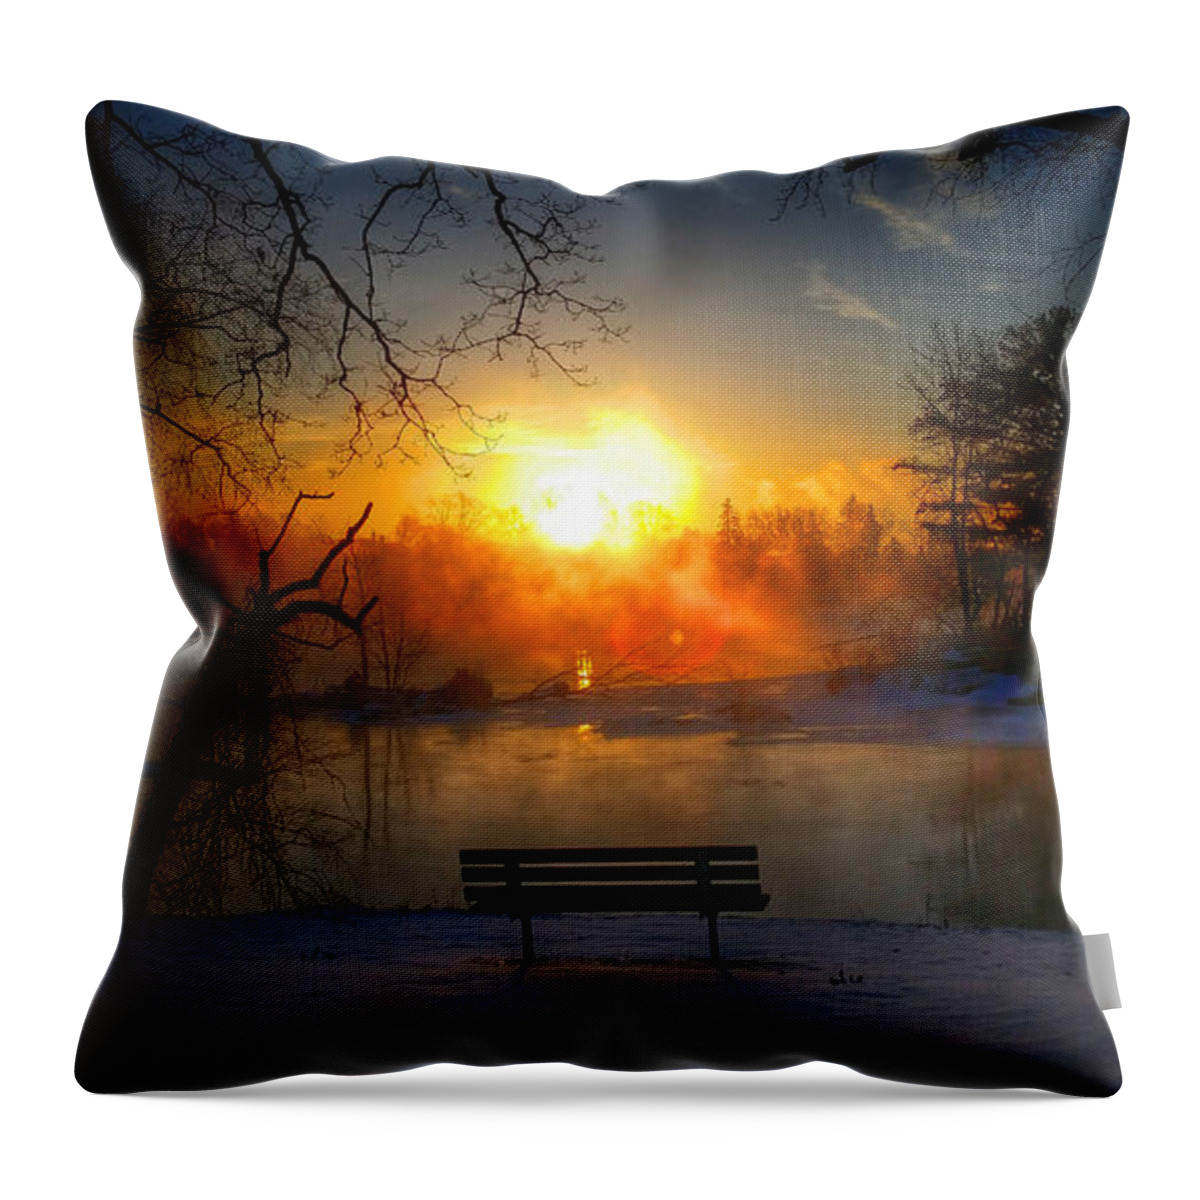 River Throw Pillow featuring the photograph Awaiting by Brook Burling